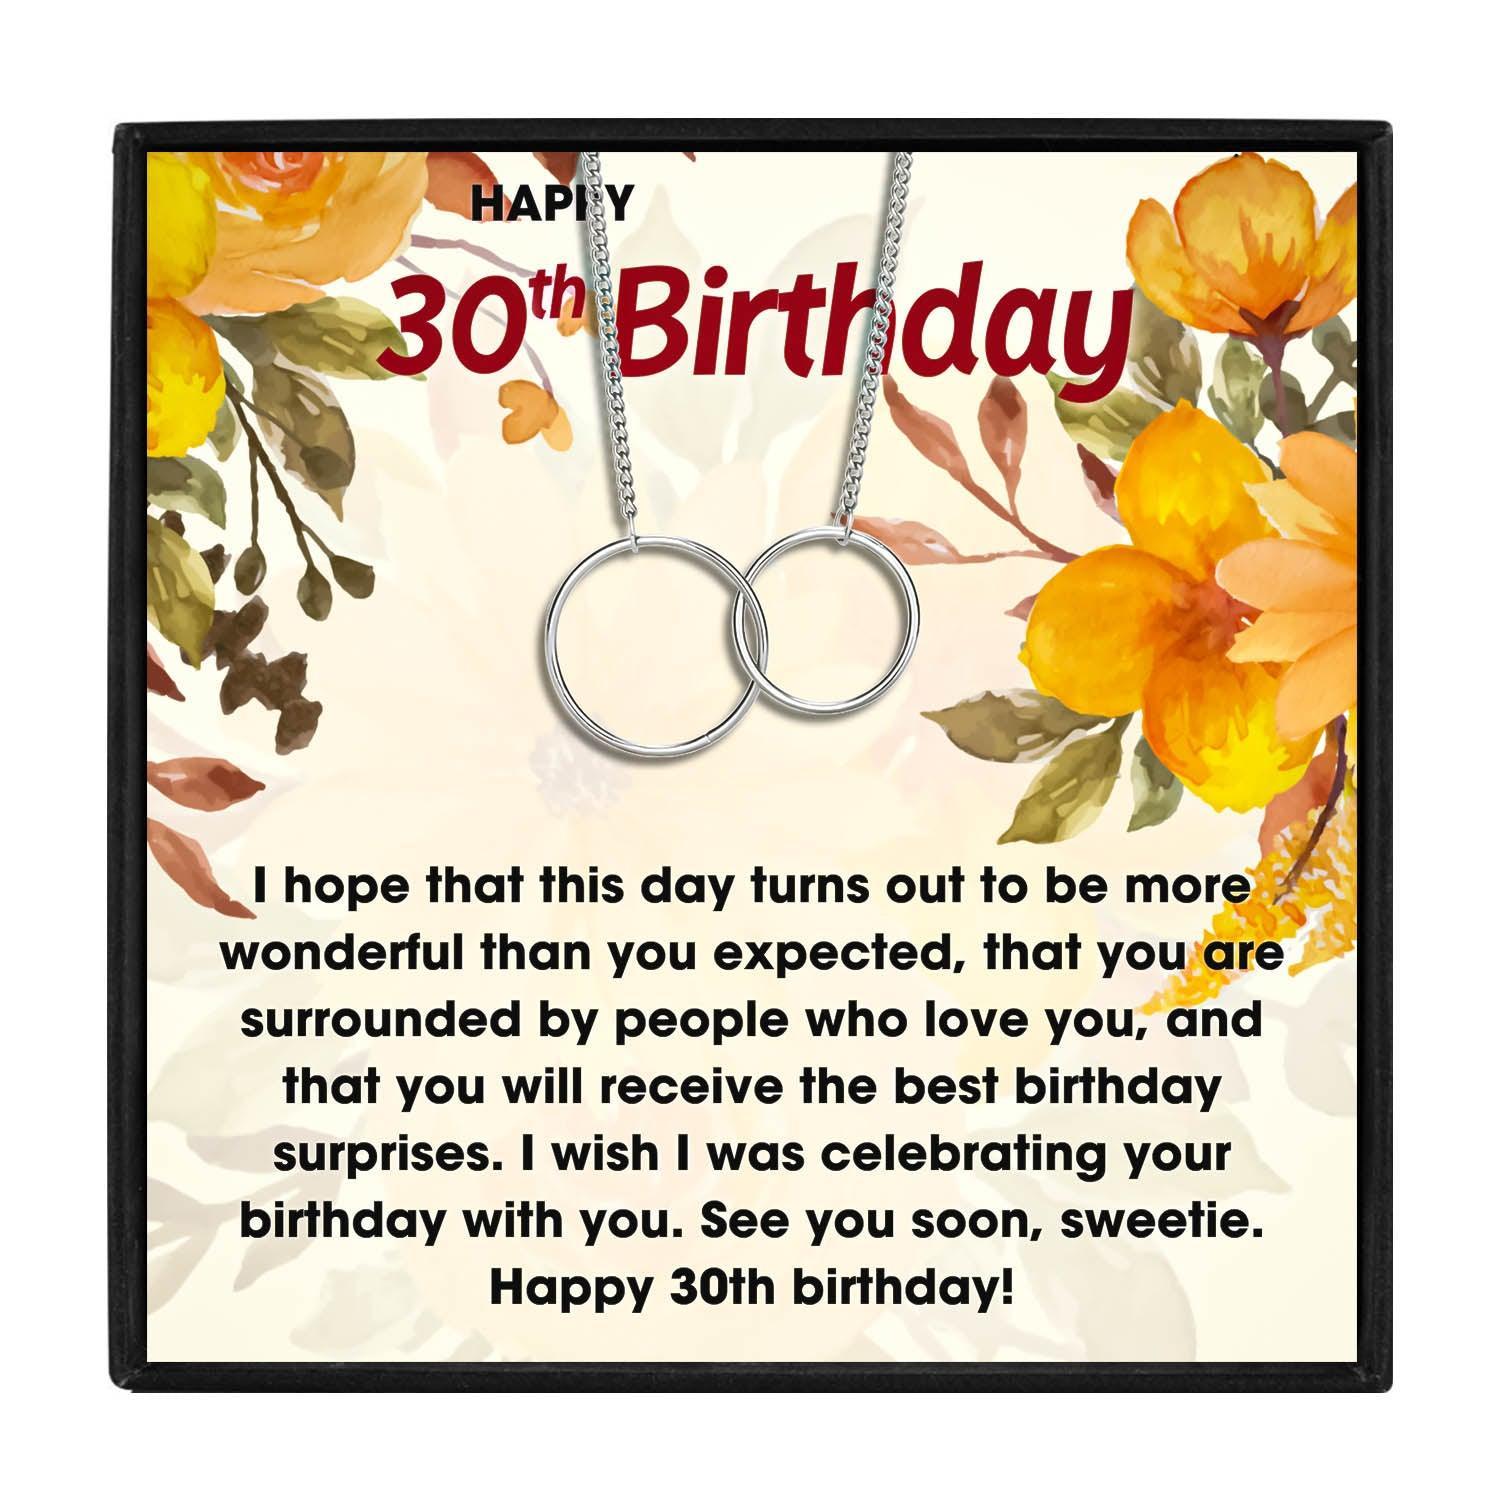 Thoughtful 30th Birthday Gifts For Her for Christmas 2023 | Thoughtful 30th Birthday Gifts For Her - undefined | 30th birthday gifts for her, 30th birthday ideas for her, 30th birthday present ideas, 30th birthday presents | From Hunny Life | hunnylife.com